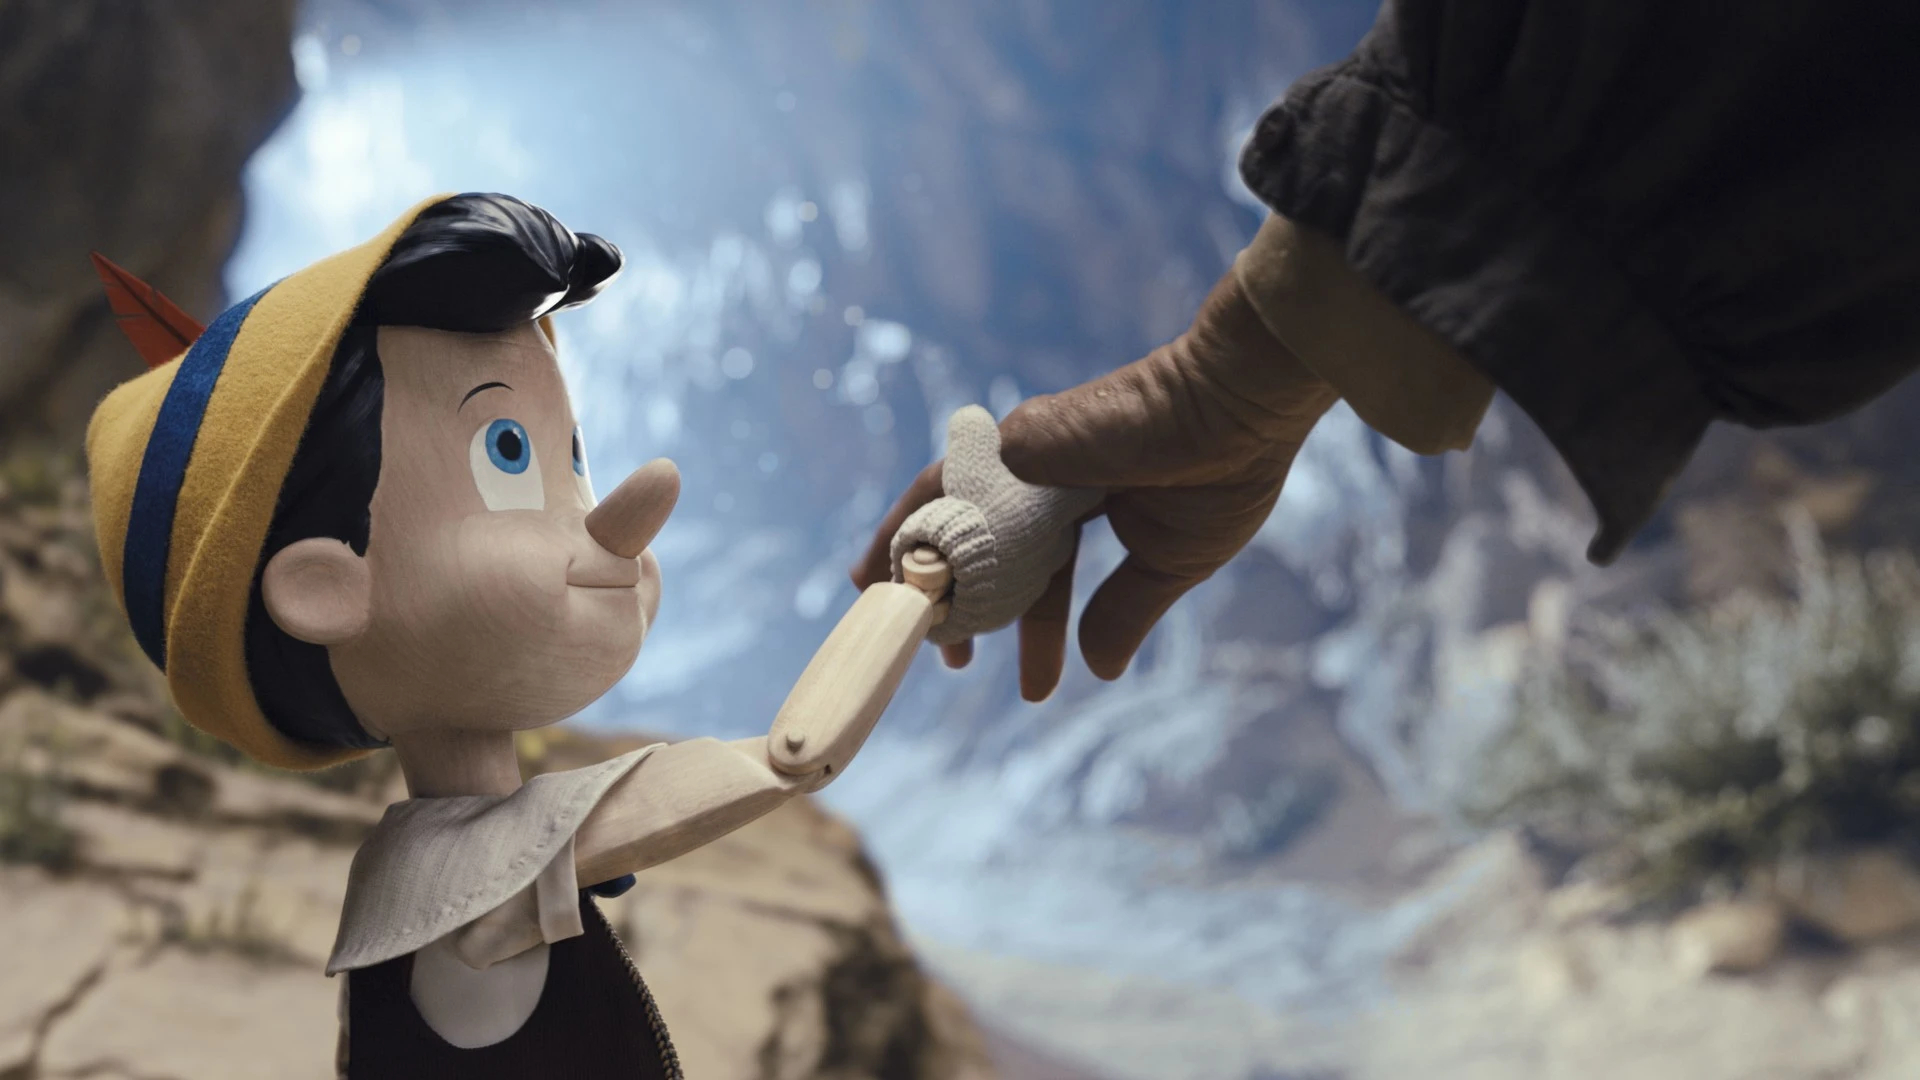 1920x1080 How to watch Pinocchio (2022) online now it's streaming | Digital Trends